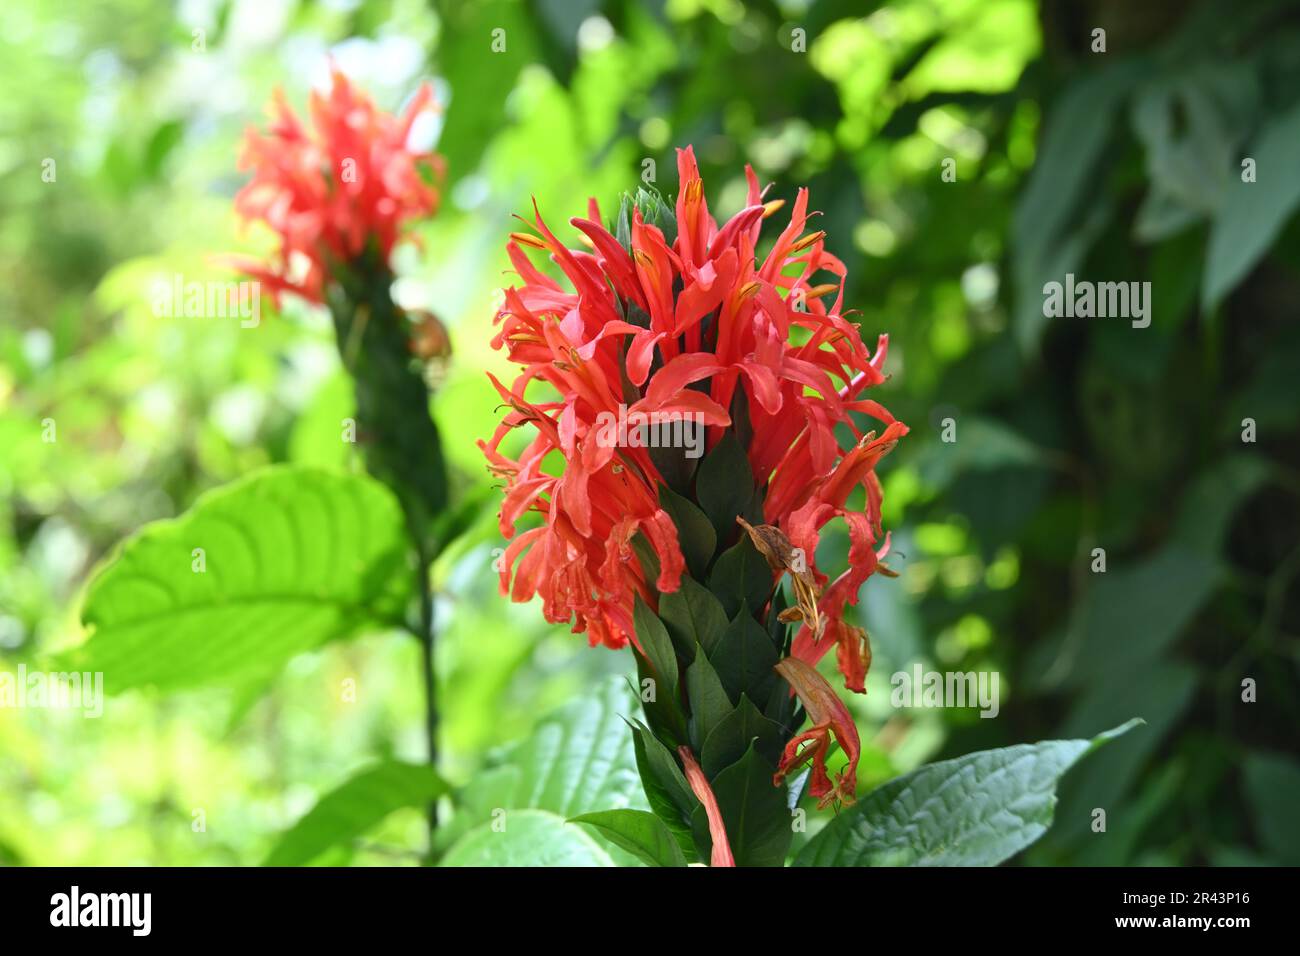 A red flower inflorescence of a Brazilian plume flower (Justicia Carnea) plant in the garden Stock Photo